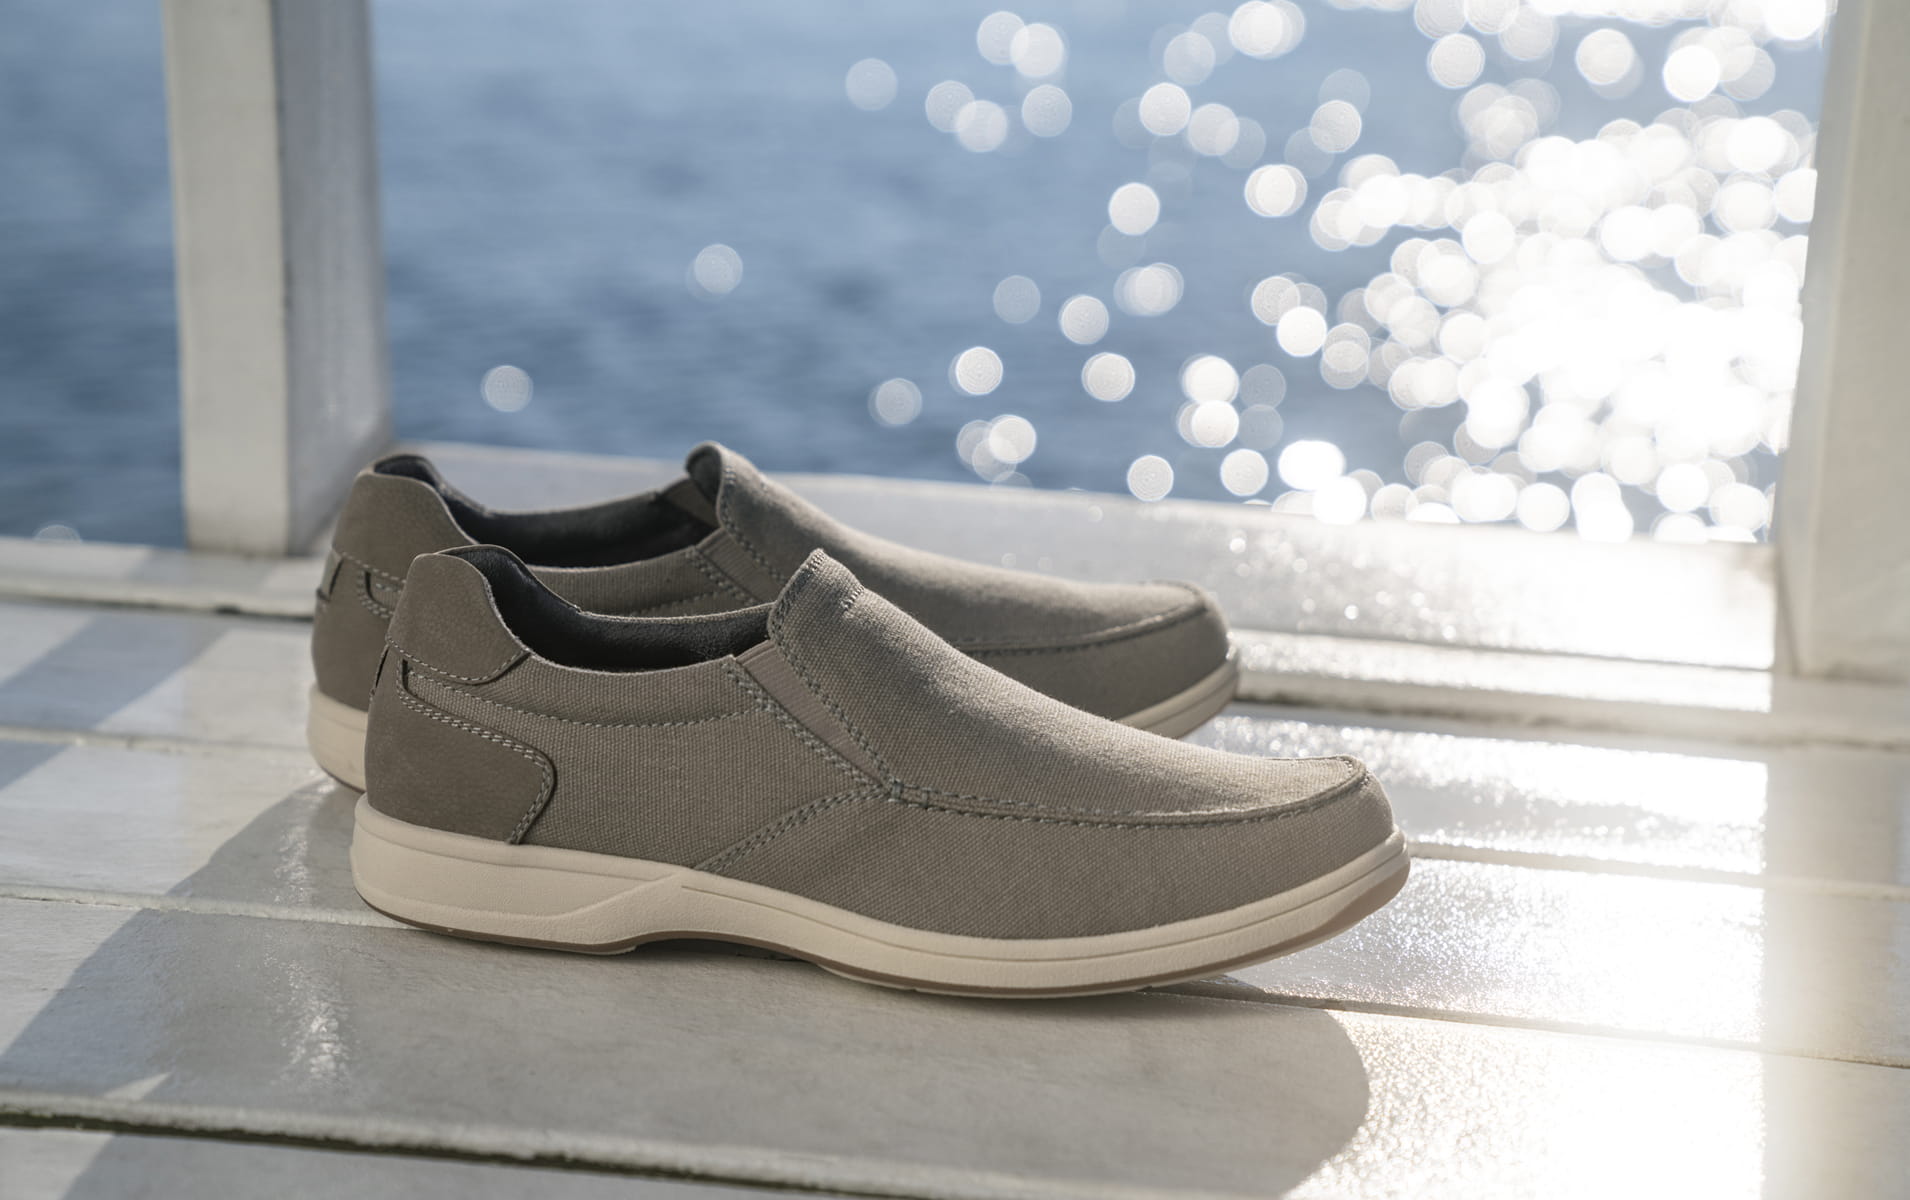 Click to shop Florsheim casuals. Image features the Lakeside in grey.